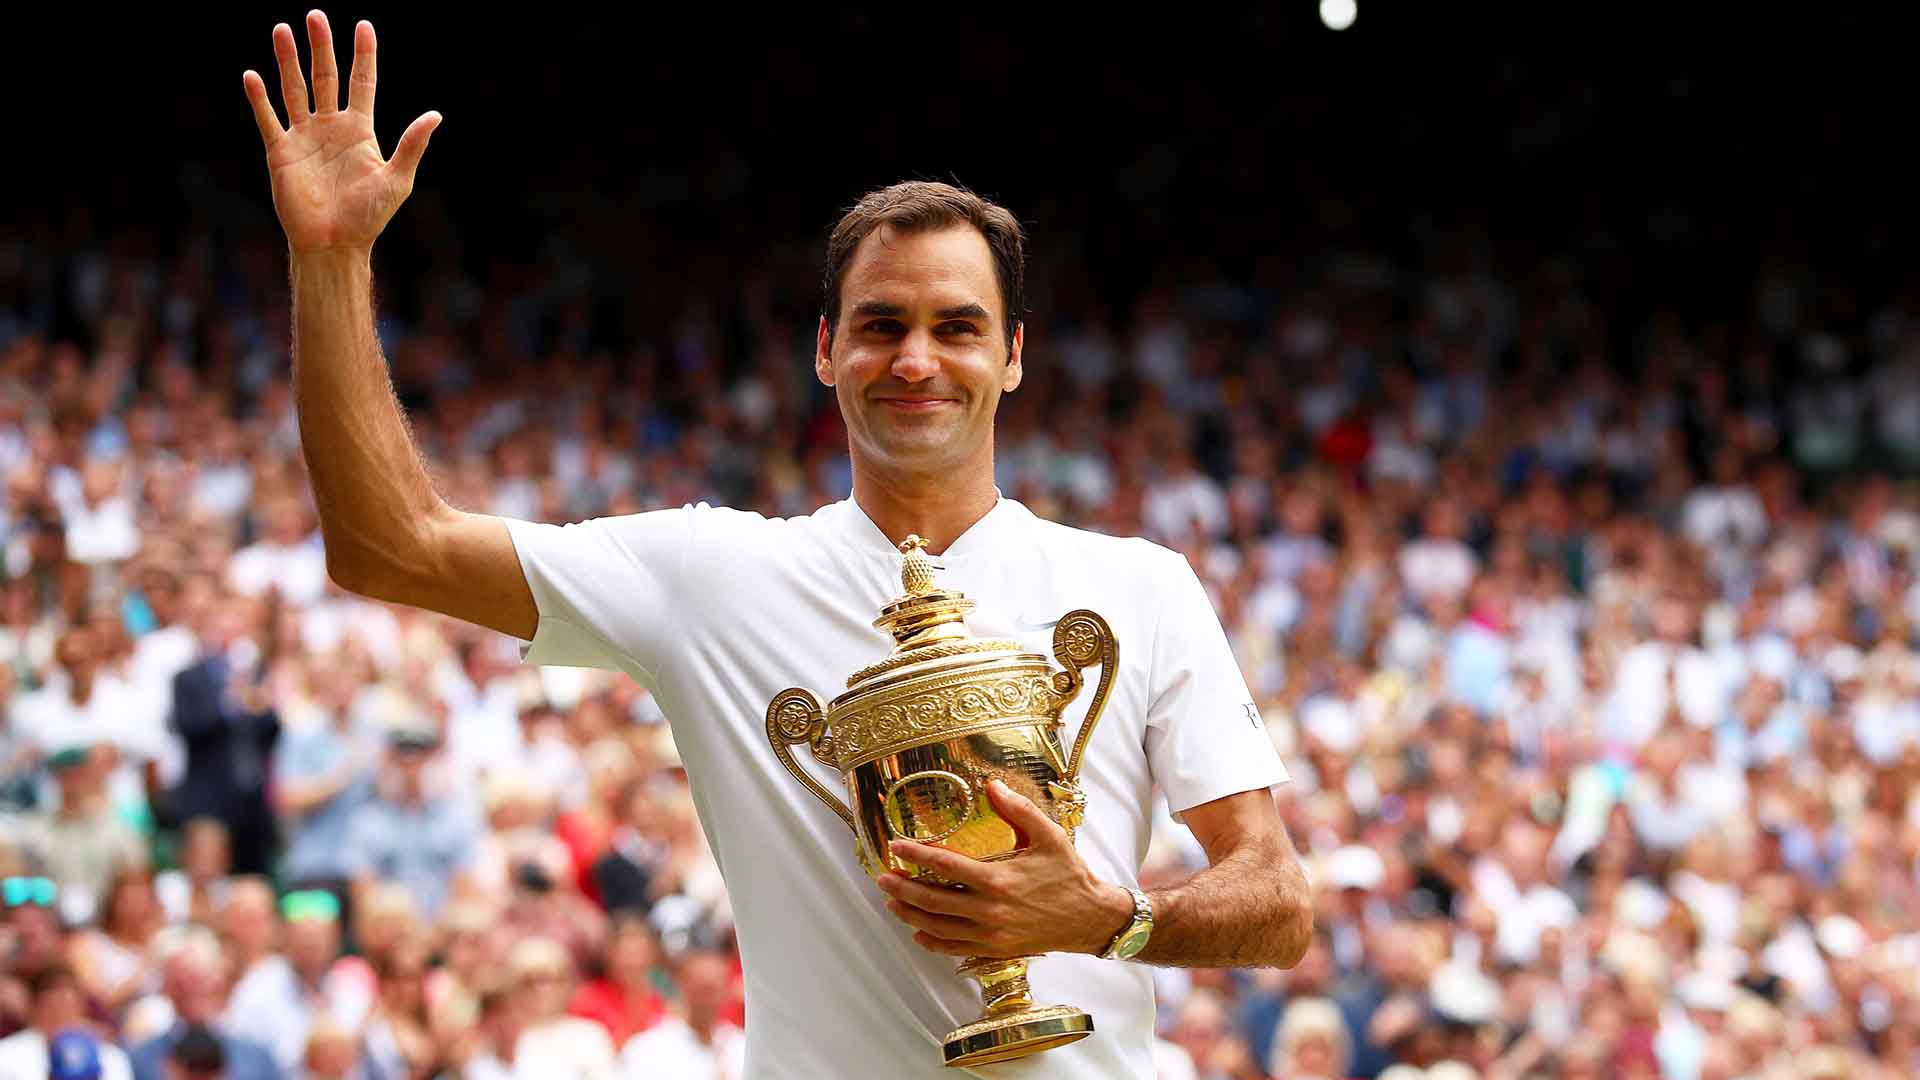 <a href='https://www.atptour.com/en/players/roger-federer/f324/overview'>Roger Federer</a> beats <a href='https://www.atptour.com/en/players/marin-cilic/c977/overview'>Marin Cilic</a> in straight sets to capture a record eighth Gentlemen's Singles title at <a href='https://www.atptour.com/en/tournaments/wimbledon/540/overview'>Wimbledon</a>.